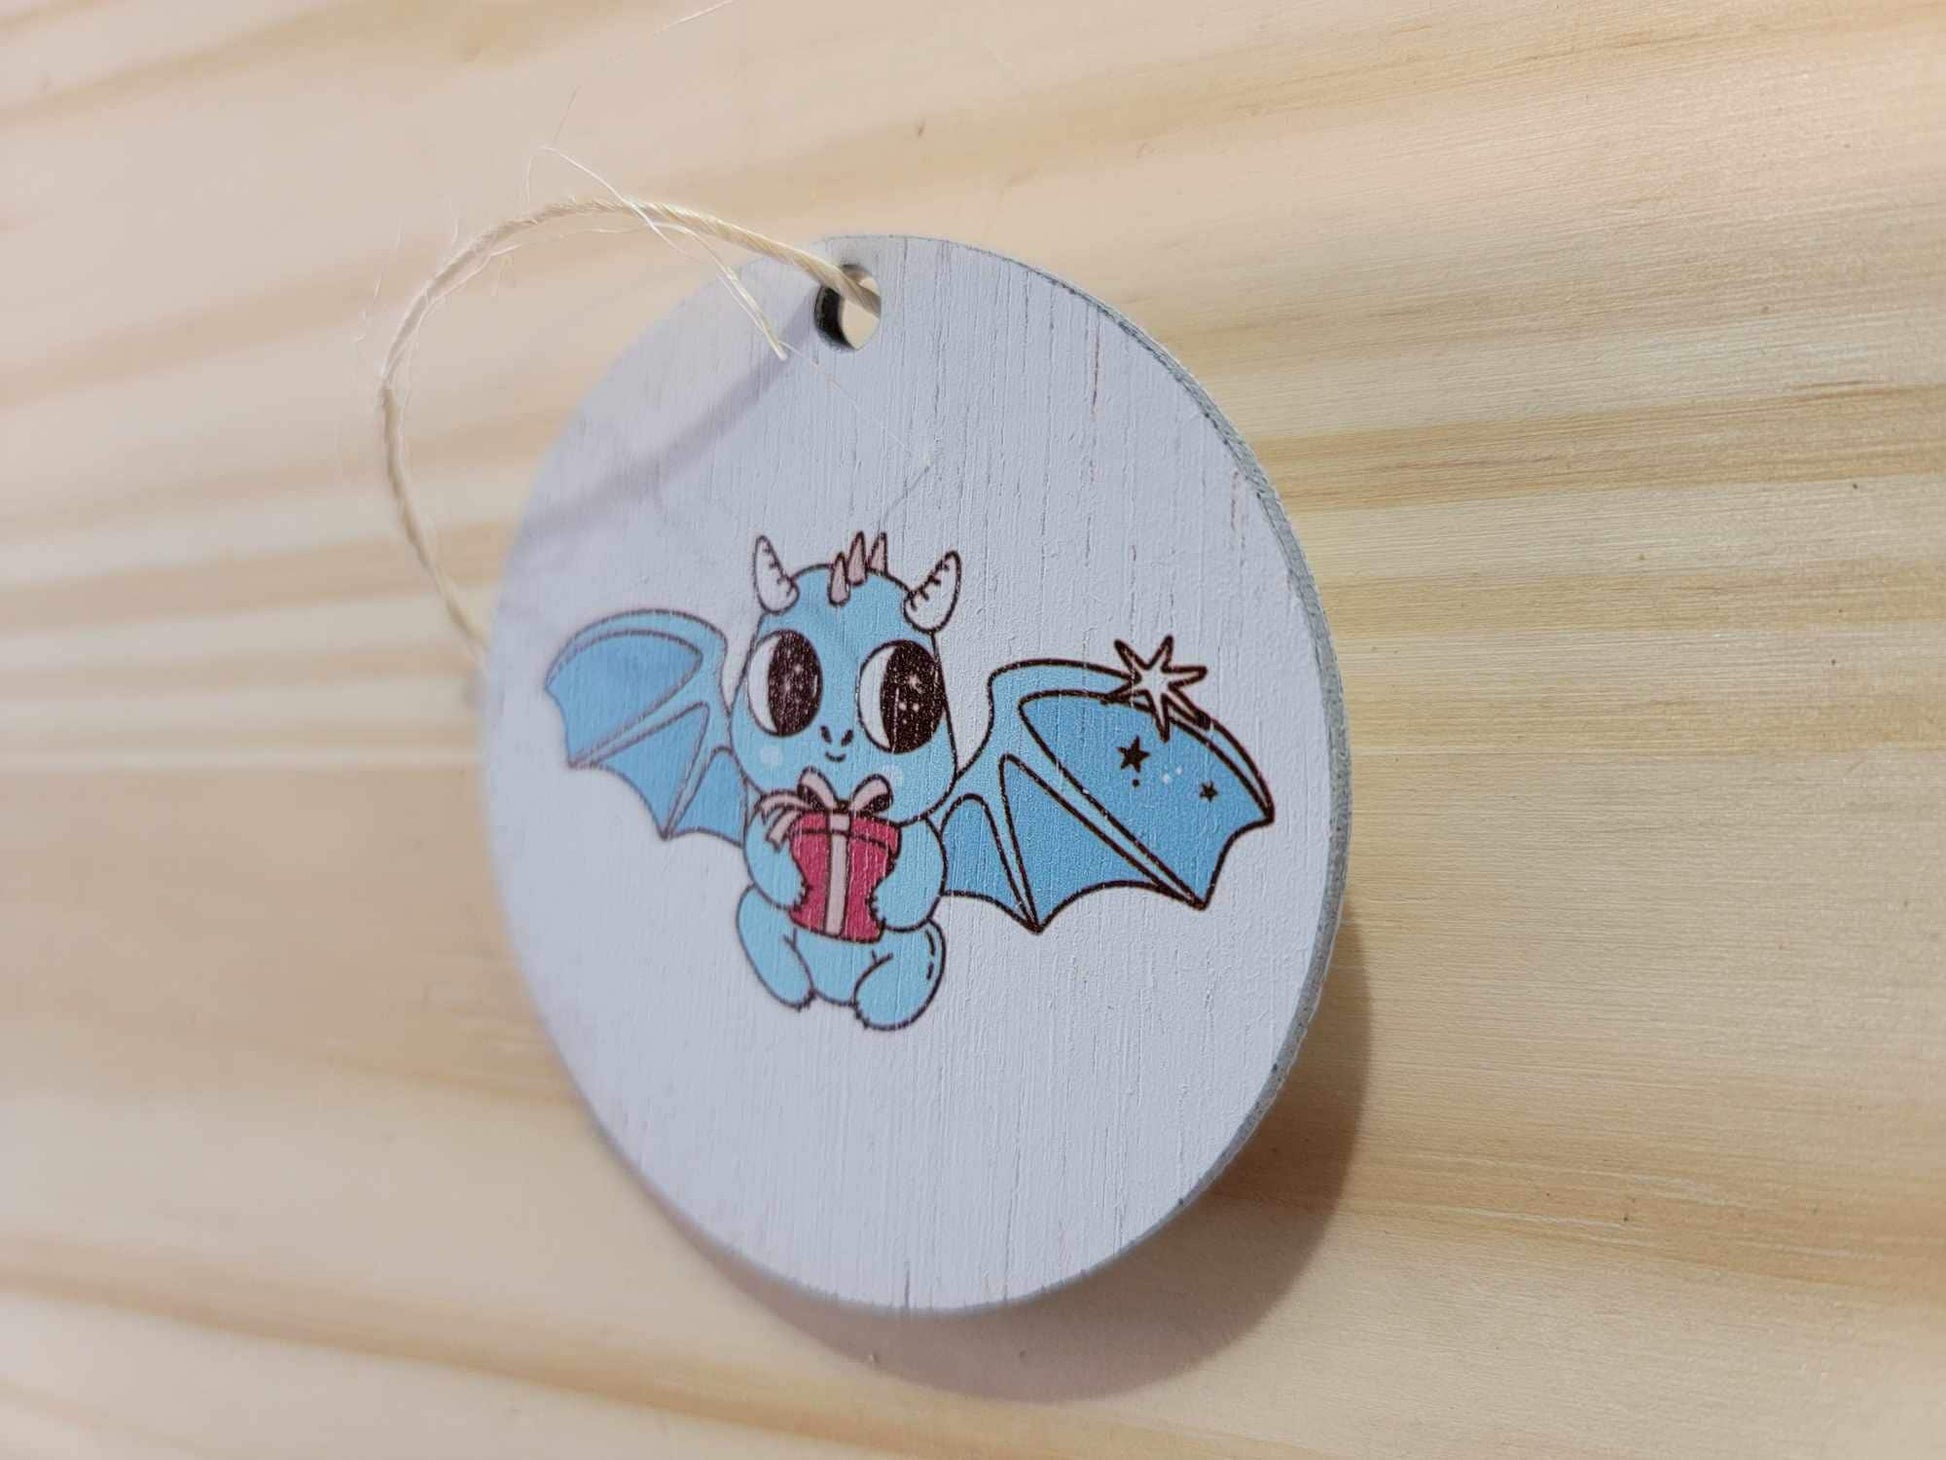 Dragon Little Monster Cute Cartoon Festive Cryptic Ornament Collector Mythical Printed Keychain Giftable Gift for Him Gift for her Wooden